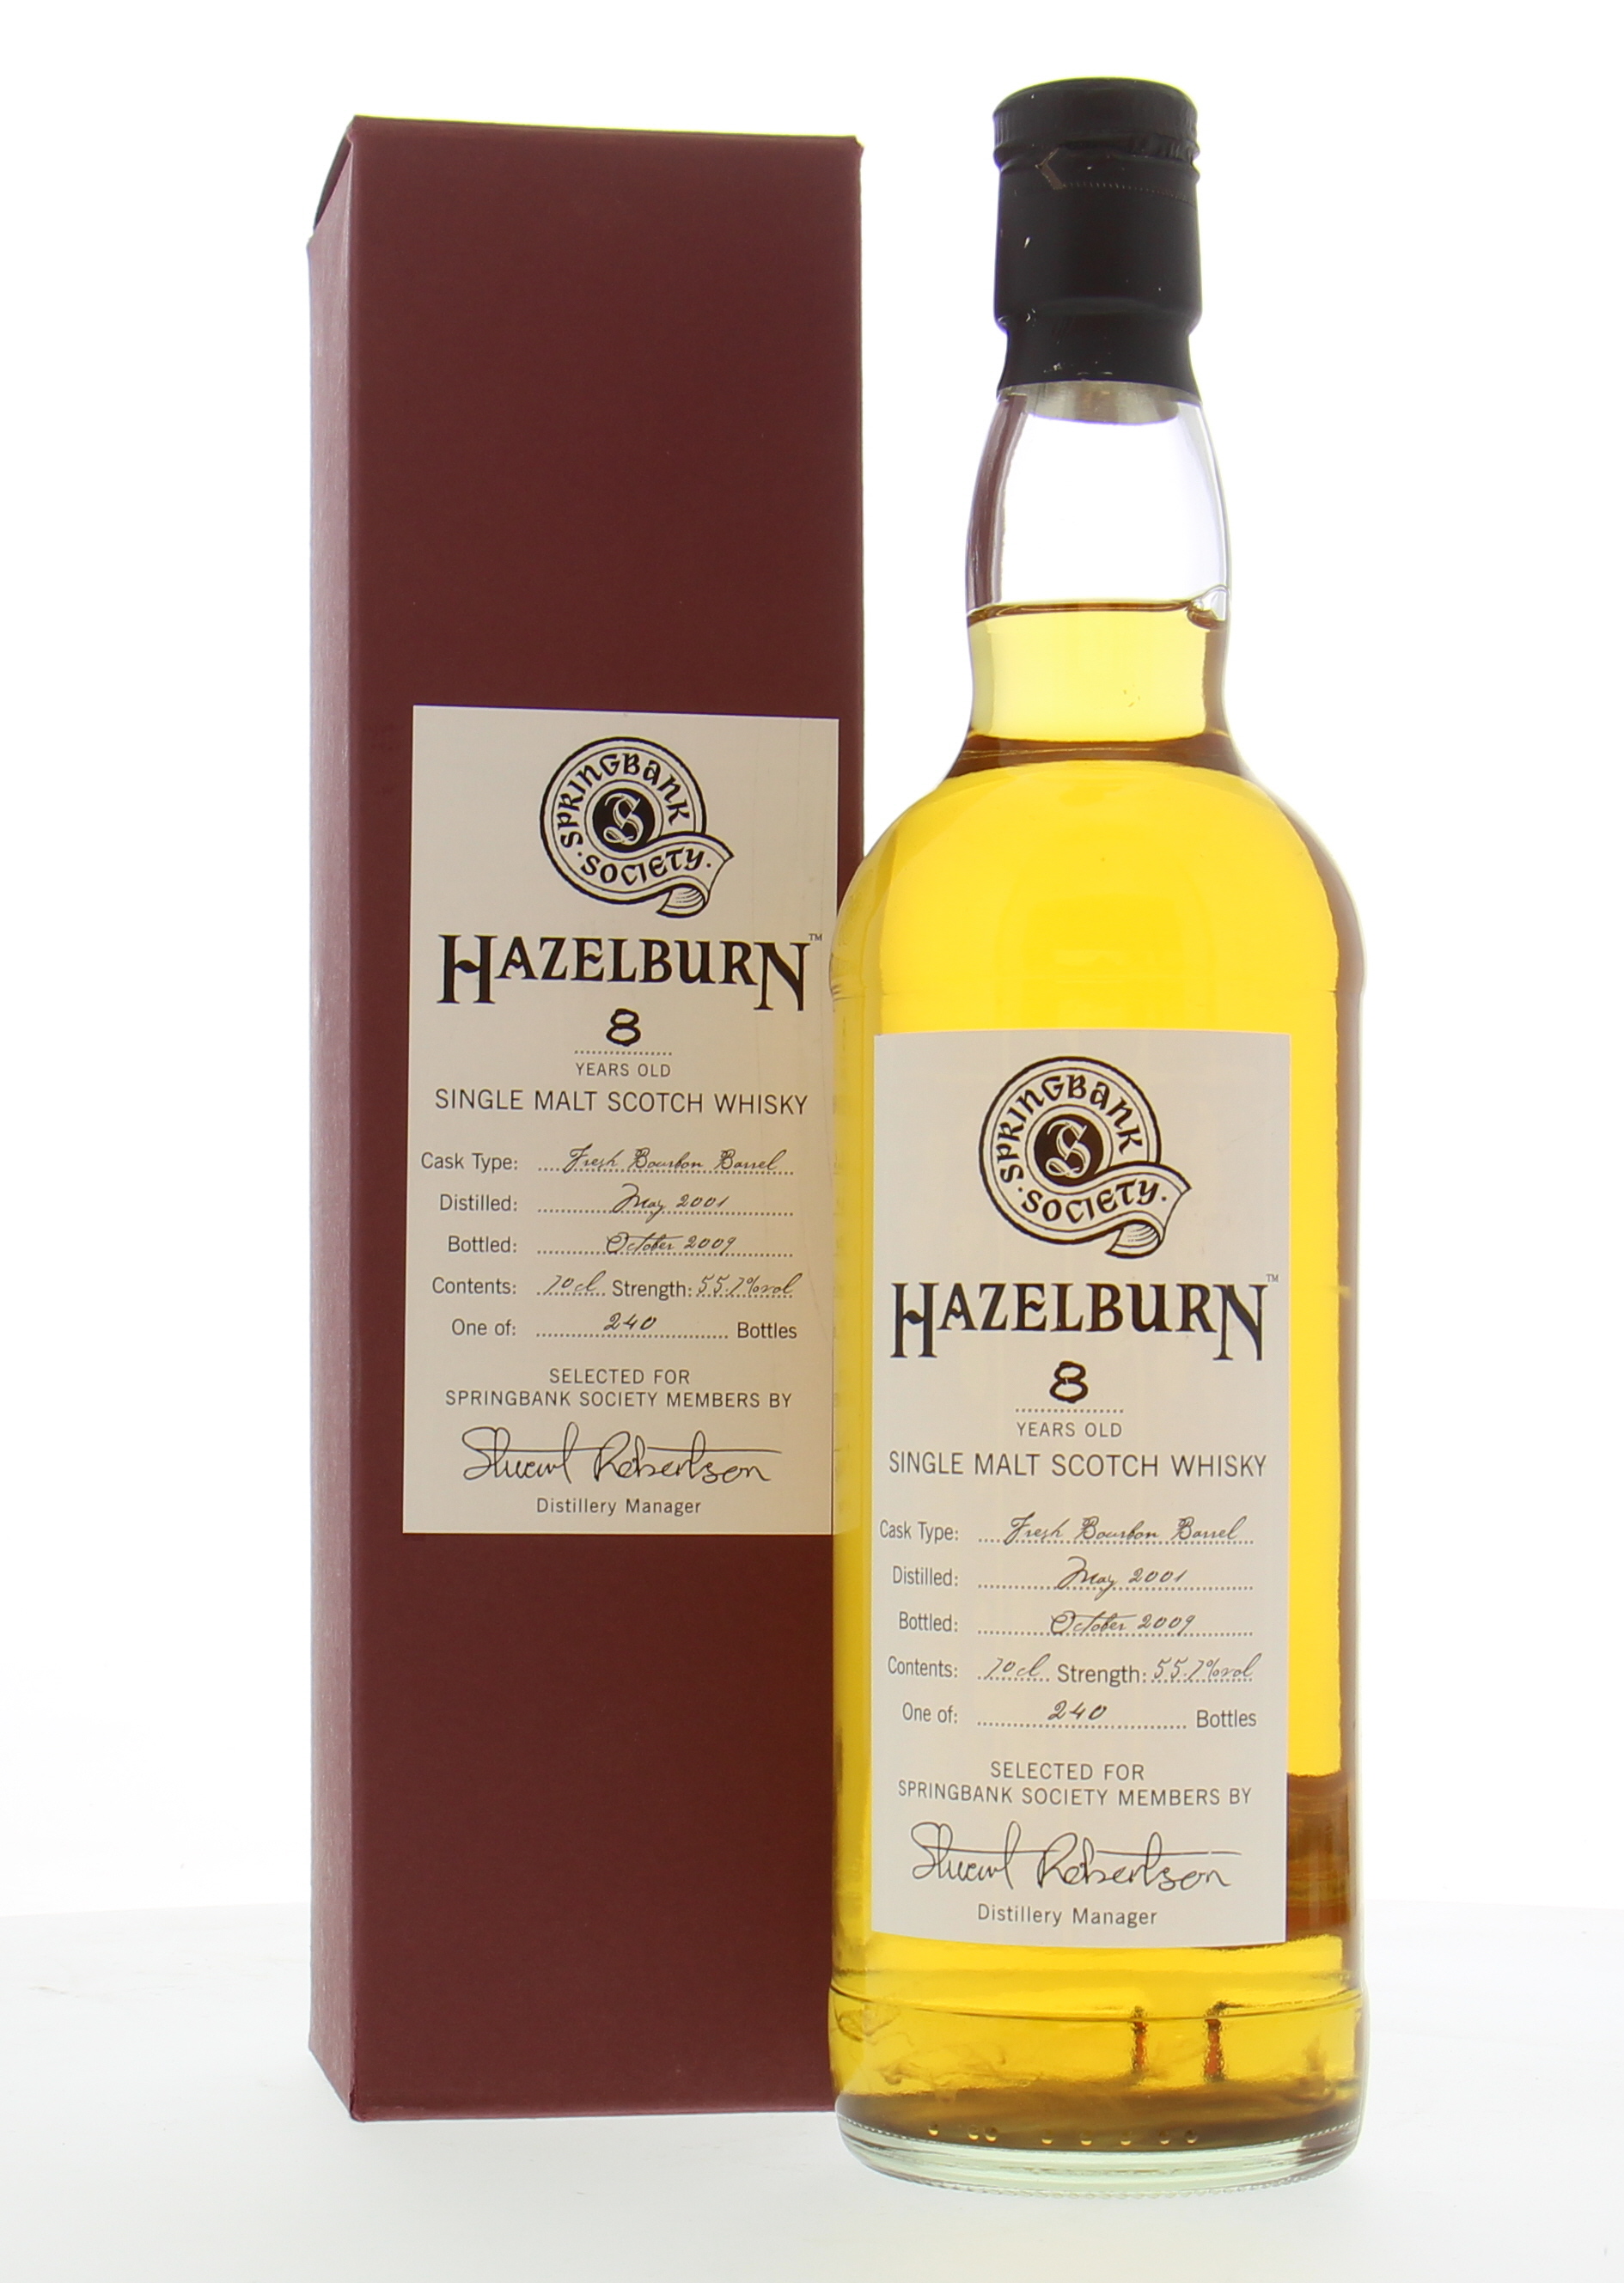 Hazelburn - 8 Years Old Springbank Society Bottling 55.7% 2001 In Original Container